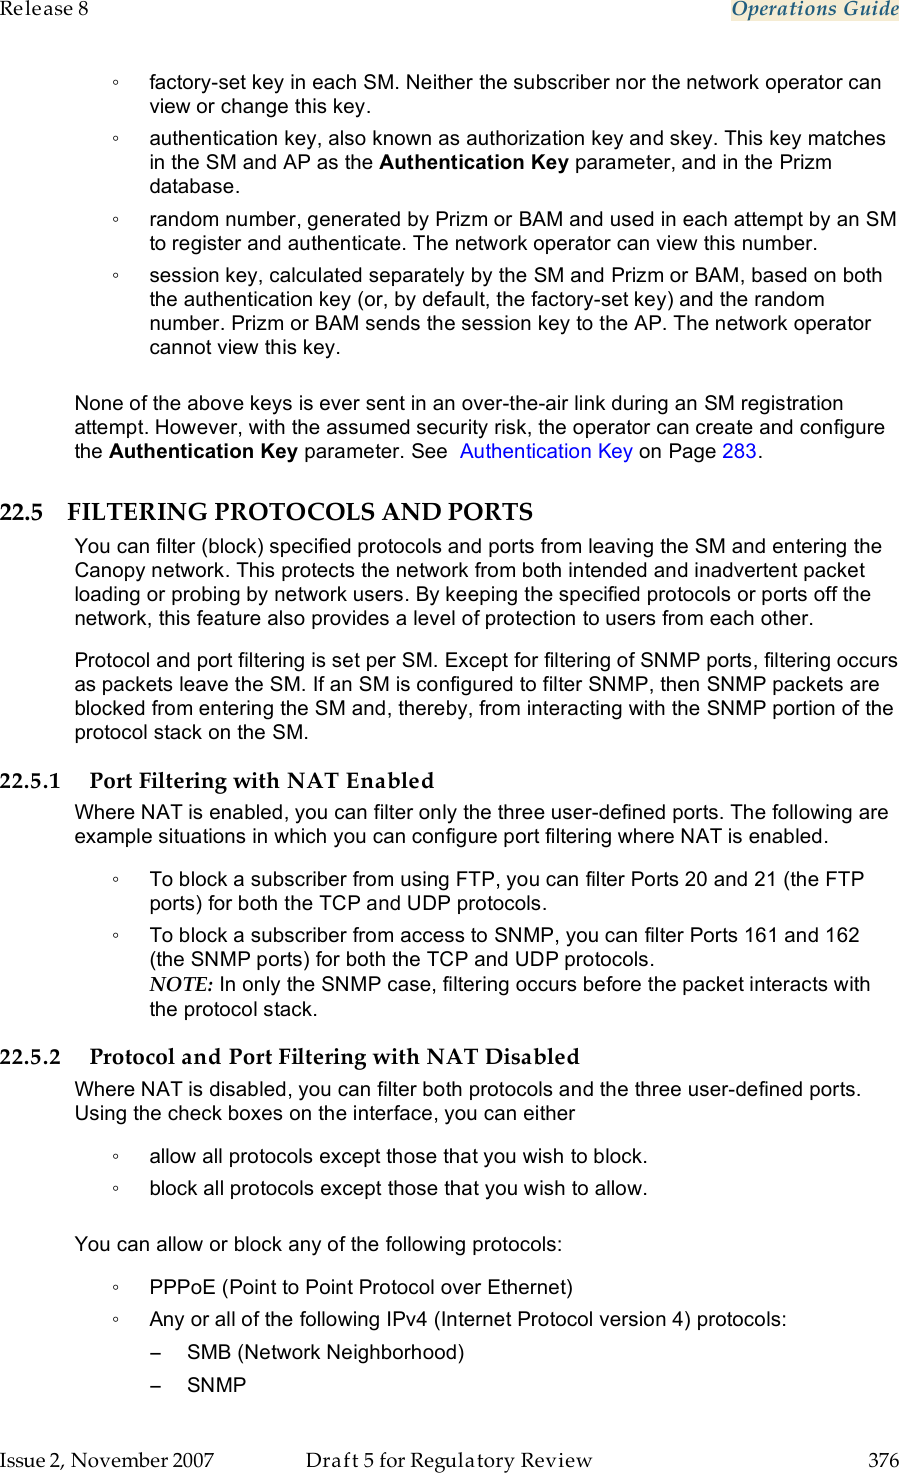 Release 8    Operations Guide   Issue 2, November 2007  Draft 5 for Regulatory Review  376     ◦  factory-set key in each SM. Neither the subscriber nor the network operator can view or change this key. ◦  authentication key, also known as authorization key and skey. This key matches in the SM and AP as the Authentication Key parameter, and in the Prizm database. ◦  random number, generated by Prizm or BAM and used in each attempt by an SM to register and authenticate. The network operator can view this number. ◦  session key, calculated separately by the SM and Prizm or BAM, based on both the authentication key (or, by default, the factory-set key) and the random number. Prizm or BAM sends the session key to the AP. The network operator cannot view this key.  None of the above keys is ever sent in an over-the-air link during an SM registration attempt. However, with the assumed security risk, the operator can create and configure the Authentication Key parameter. See  Authentication Key on Page 283.  22.5 FILTERING PROTOCOLS AND PORTS You can filter (block) specified protocols and ports from leaving the SM and entering the Canopy network. This protects the network from both intended and inadvertent packet loading or probing by network users. By keeping the specified protocols or ports off the network, this feature also provides a level of protection to users from each other. Protocol and port filtering is set per SM. Except for filtering of SNMP ports, filtering occurs as packets leave the SM. If an SM is configured to filter SNMP, then SNMP packets are blocked from entering the SM and, thereby, from interacting with the SNMP portion of the protocol stack on the SM. 22.5.1 Port Filtering with NAT Enabled Where NAT is enabled, you can filter only the three user-defined ports. The following are example situations in which you can configure port filtering where NAT is enabled. ◦  To block a subscriber from using FTP, you can filter Ports 20 and 21 (the FTP ports) for both the TCP and UDP protocols.  ◦  To block a subscriber from access to SNMP, you can filter Ports 161 and 162 (the SNMP ports) for both the TCP and UDP protocols.  NOTE: In only the SNMP case, filtering occurs before the packet interacts with the protocol stack. 22.5.2 Protocol and Port Filtering with NAT Disabled Where NAT is disabled, you can filter both protocols and the three user-defined ports. Using the check boxes on the interface, you can either  ◦  allow all protocols except those that you wish to block. ◦  block all protocols except those that you wish to allow.  You can allow or block any of the following protocols: ◦  PPPoE (Point to Point Protocol over Ethernet) ◦  Any or all of the following IPv4 (Internet Protocol version 4) protocols: −  SMB (Network Neighborhood) −  SNMP 